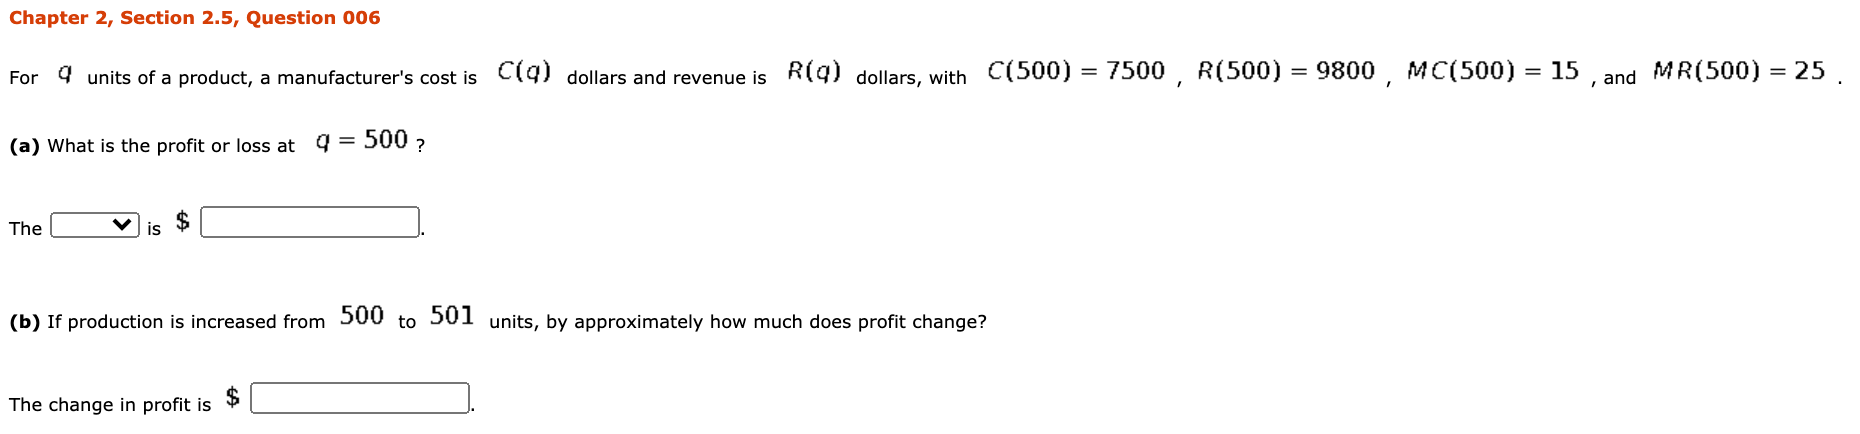 For 9 units of a product, a manufacturer's cost is C(9) dollars and revenue is R(g) dollars, with C(500) = 7500, R(500) = 9800, MC(500) = 15 and
MR(500) = 25 .
(a) What is the profit or loss at 4
500 ?
The
is
(b) If production is increased from 500 to 501 units, by approximately how much does profit change?
The change in profit is
